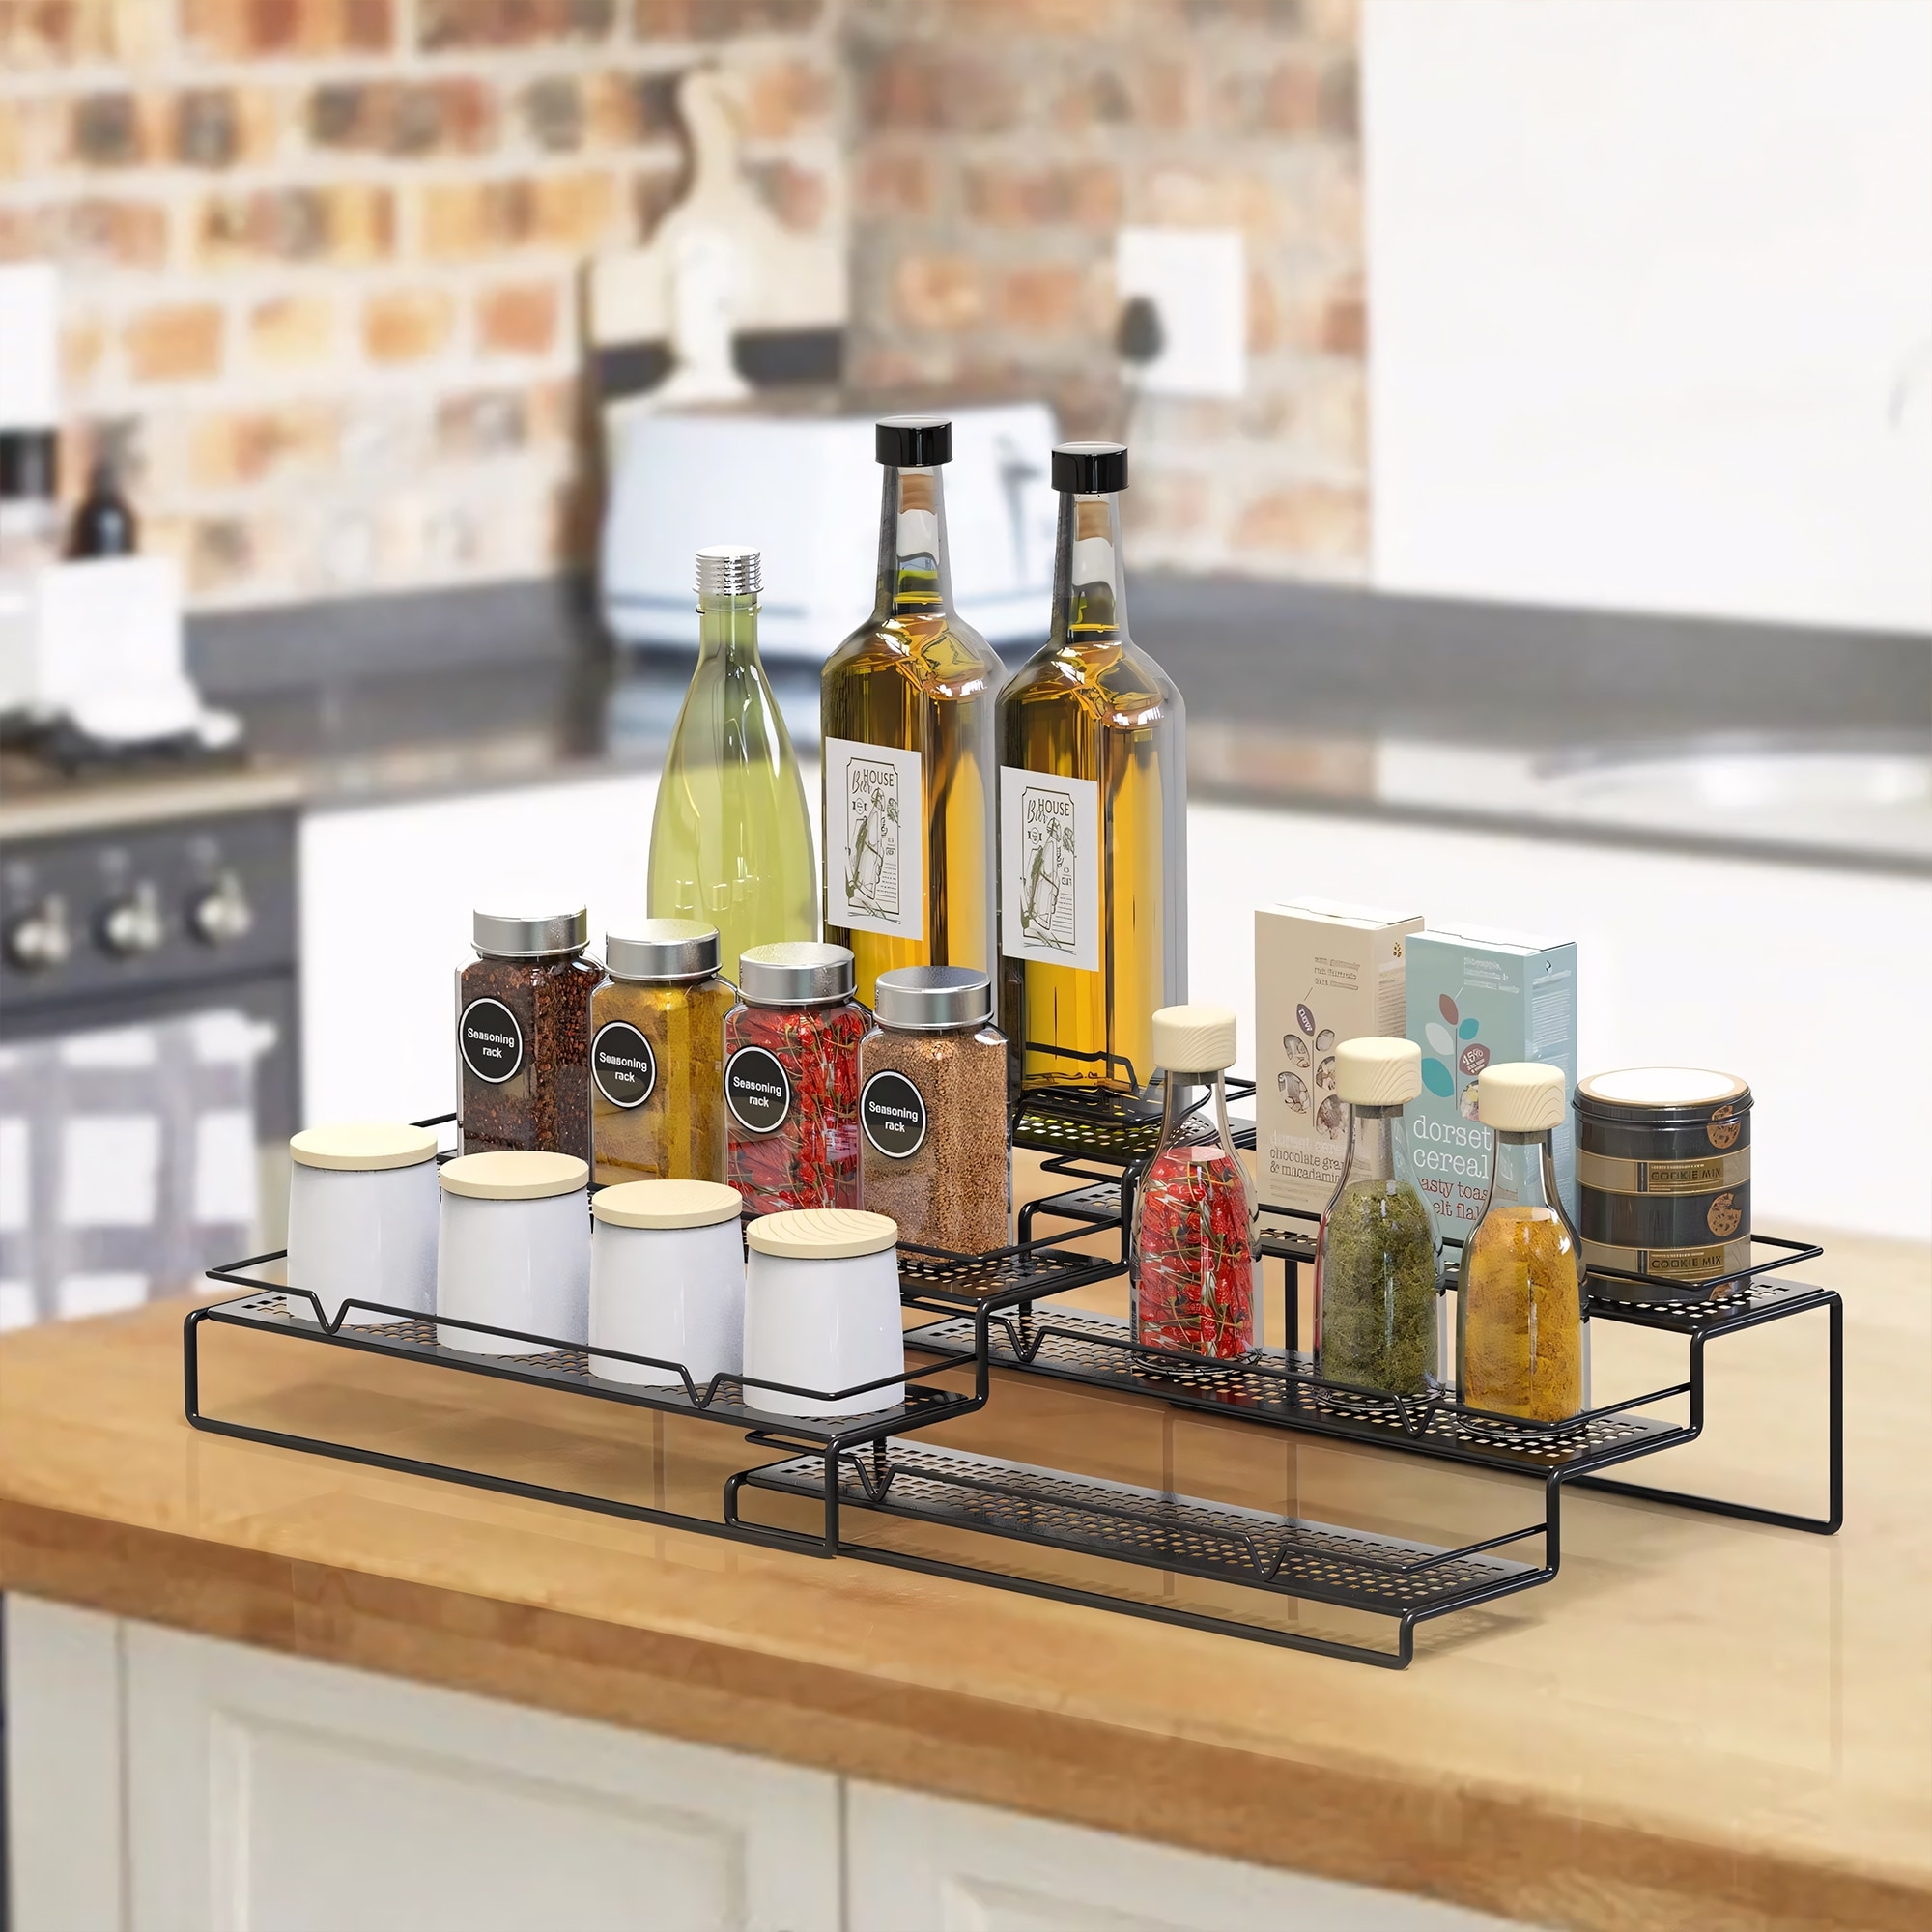 https://ak1.ostkcdn.com/images/products/is/images/direct/6f69fcf1637a30bf0d03754986ffb65490429e87/Metal-Wire-Kitchen-Spice-Rack---3-Tier-Storage-Organizer.jpg